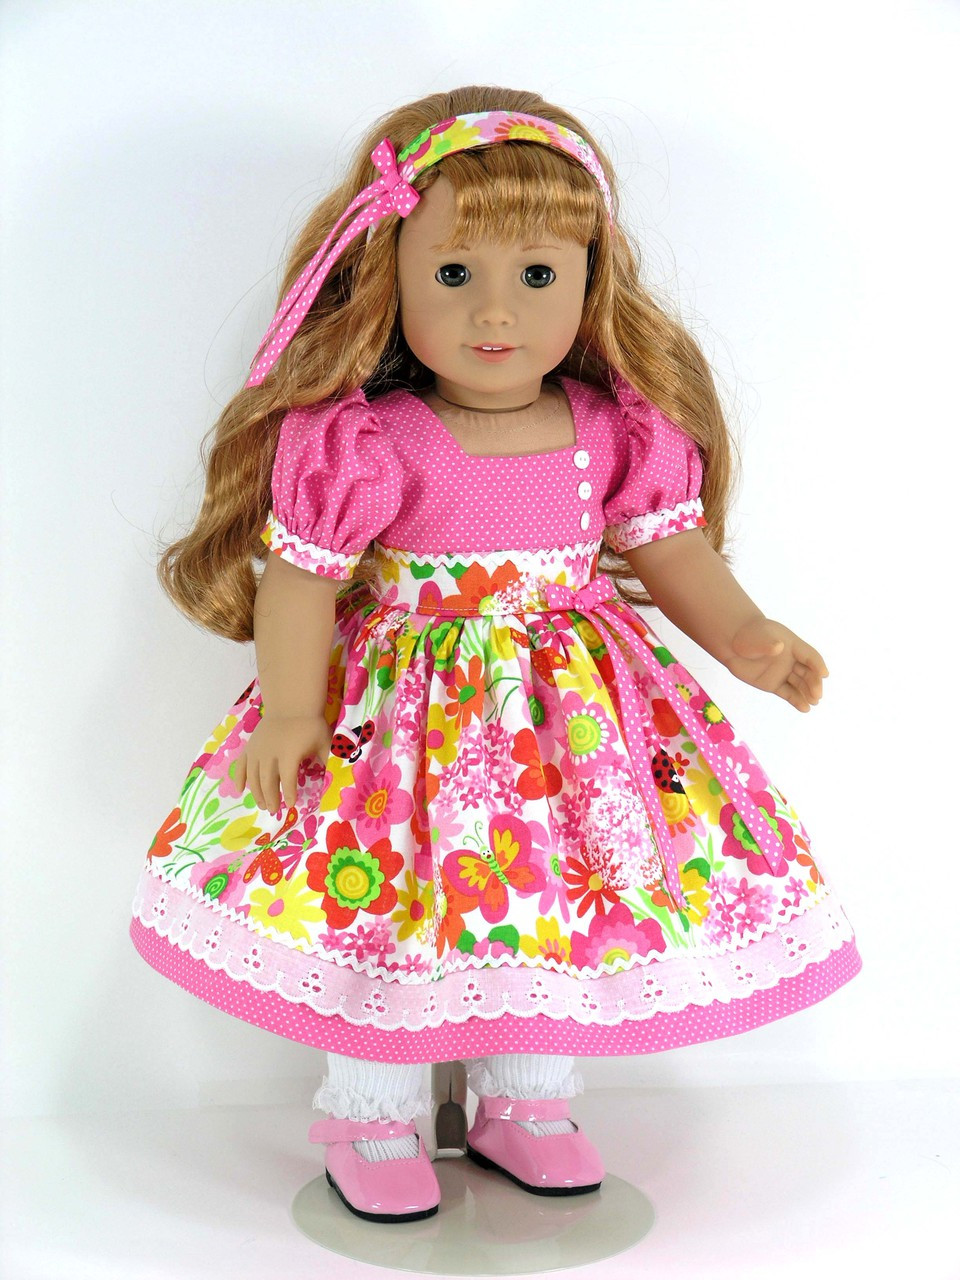 Pin on Babydoll clothes toys accessories